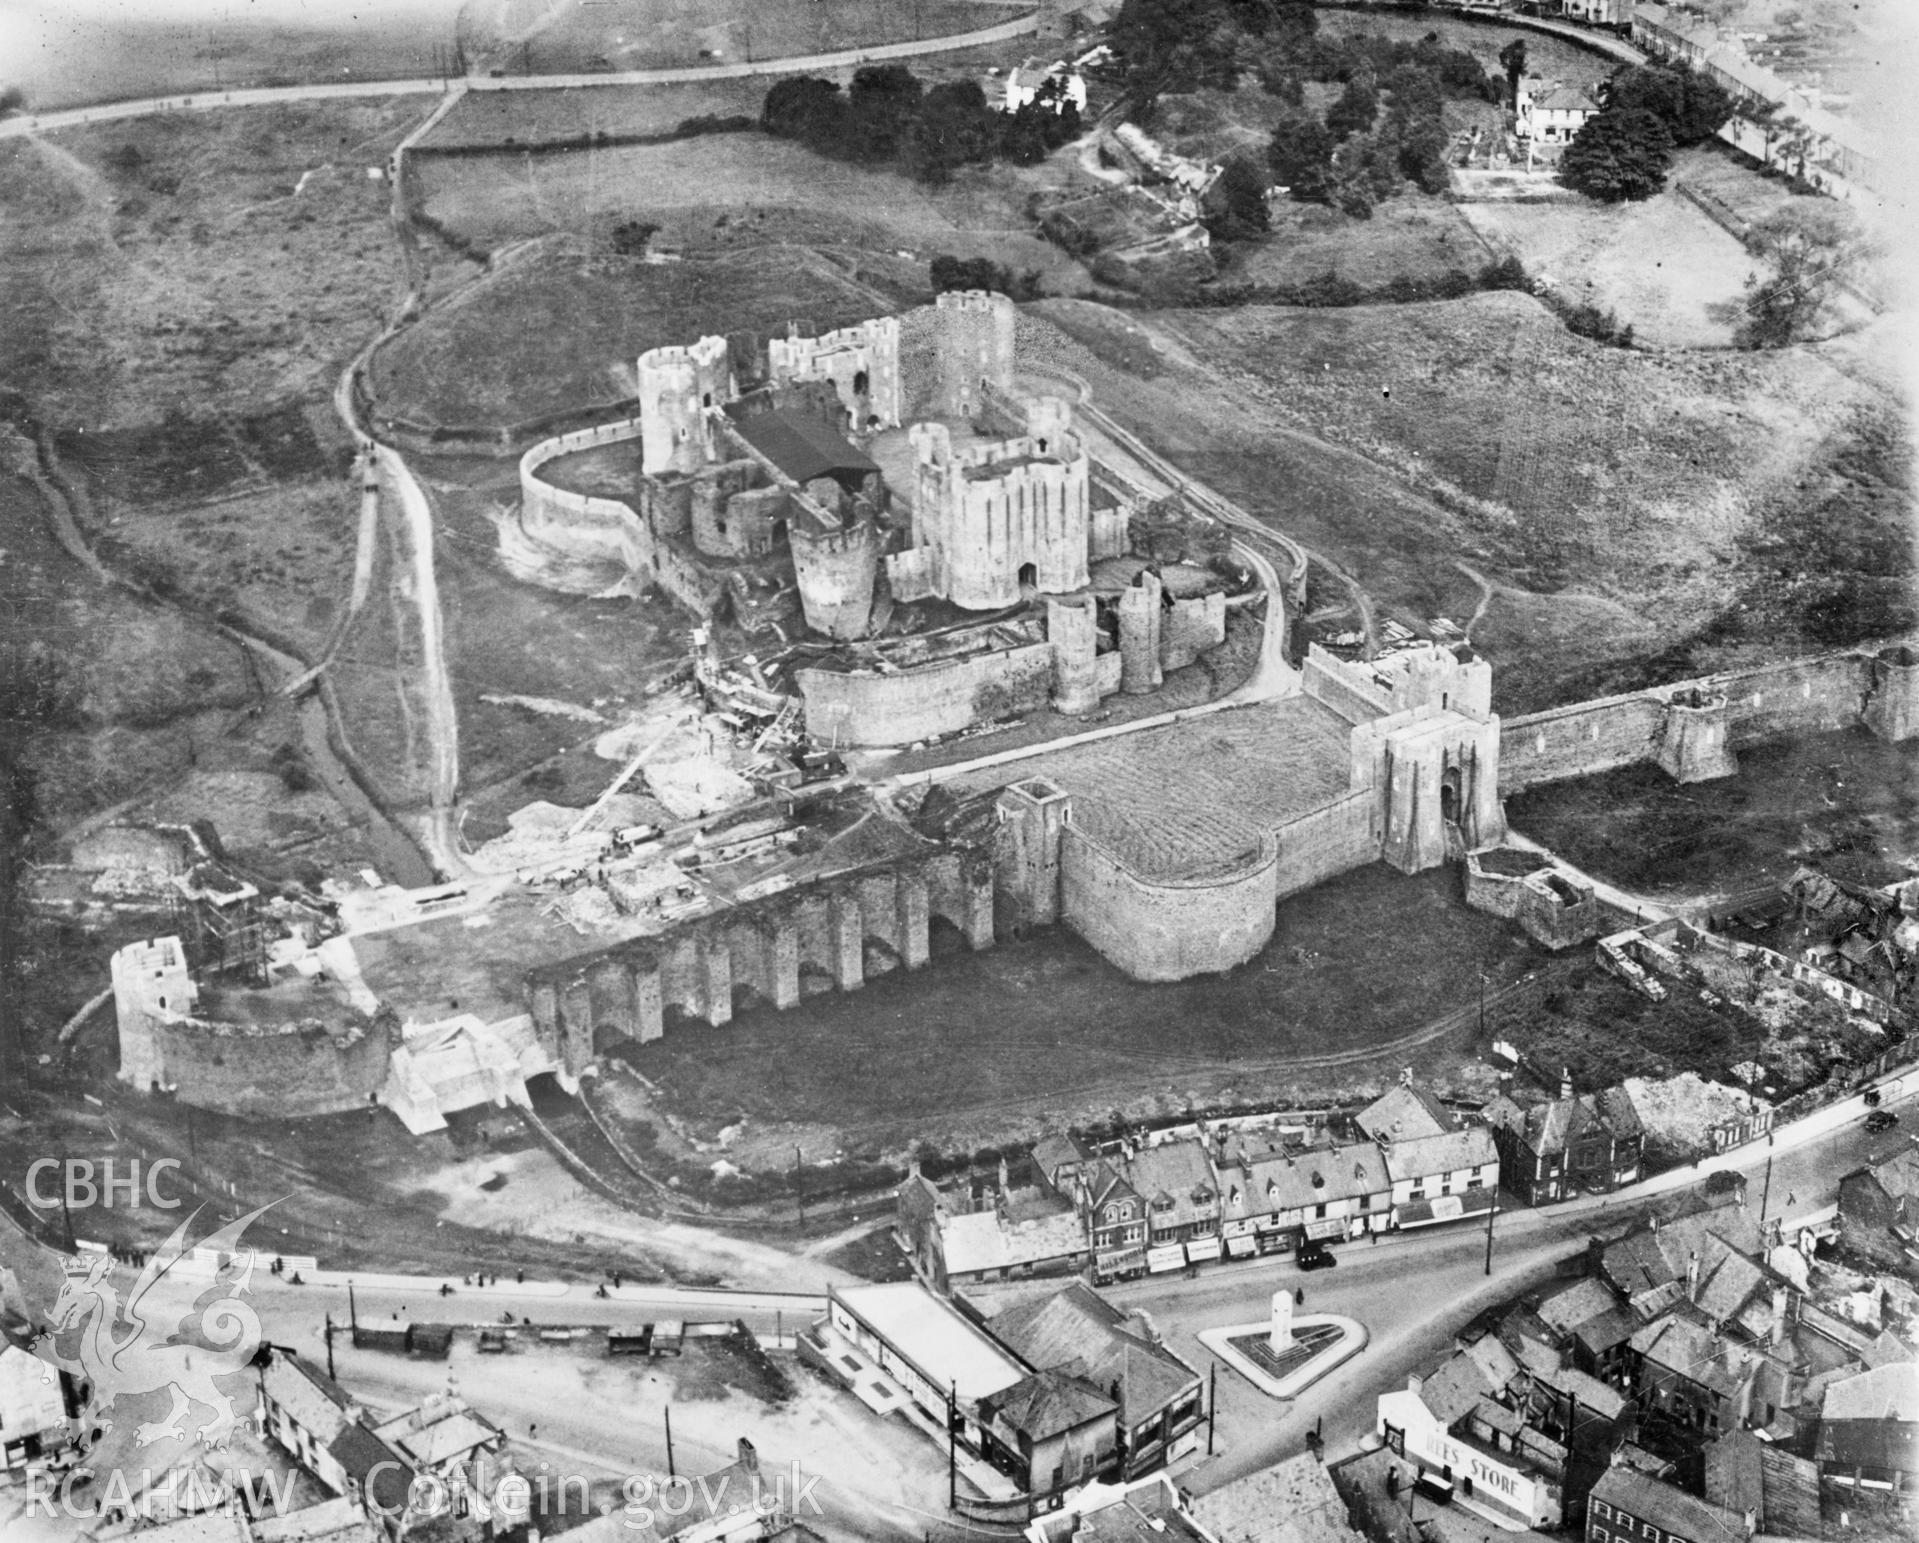 View of Caerphilly showing castle. Oblique aerial photograph, 5?x4? BW glass plate.